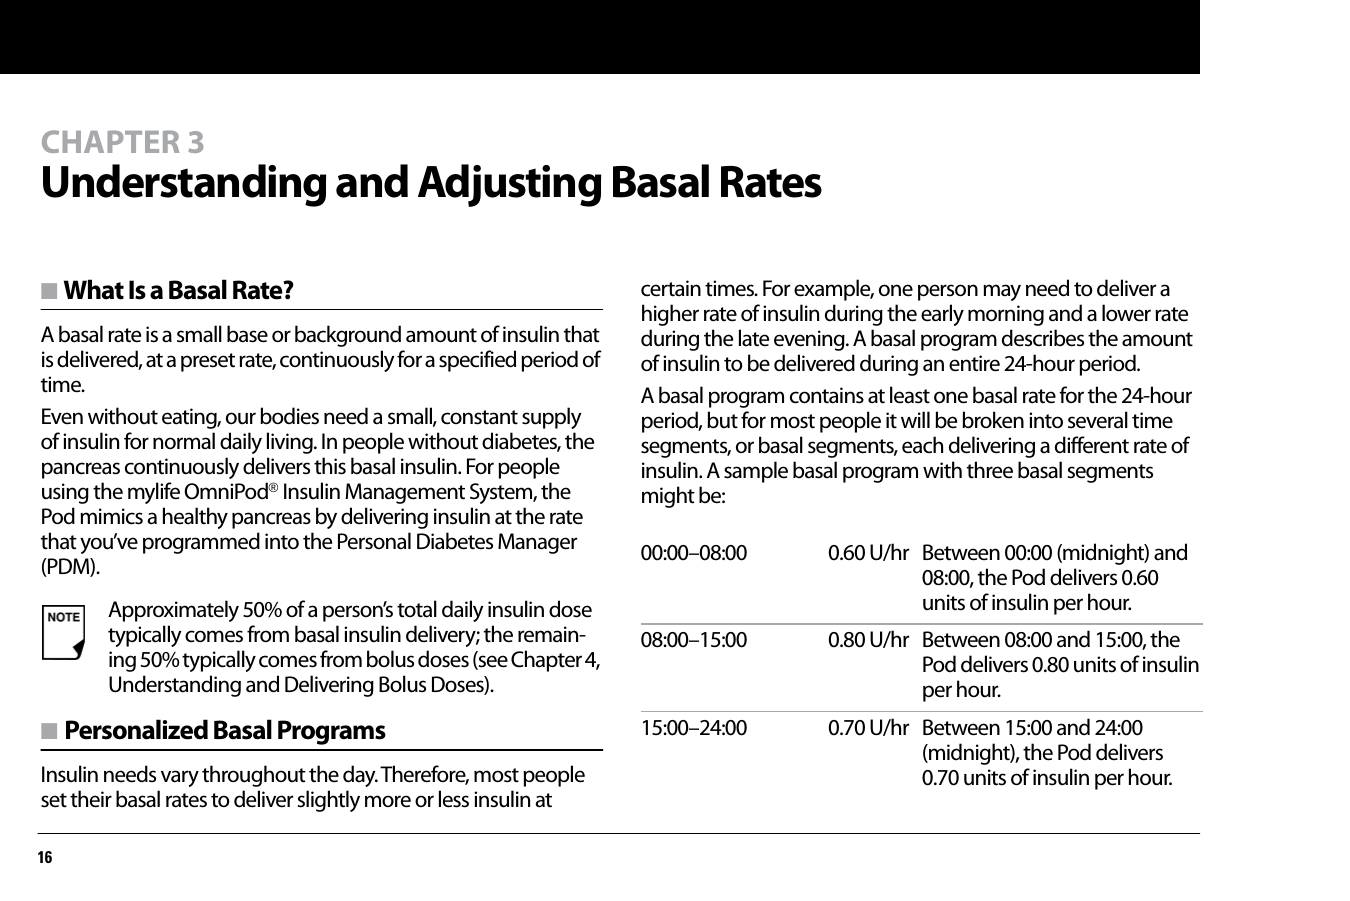 16CHAPTER 3Understanding and Adjusting Basal Ratesn What Is a Basal Rate?A basal rate is a small base or background amount of insulin that is delivered, at a preset rate, continuously for a specified period of time.Even without eating, our bodies need a small, constant supply of insulin for normal daily living. In people without diabetes, the pancreas continuously delivers this basal insulin. For people using the mylife OmniPod® Insulin Management System, the Pod mimics a healthy pancreas by delivering insulin at the rate that you’ve programmed into the Personal Diabetes Manager (PDM).n Personalized Basal ProgramsInsulin needs vary throughout the day. Therefore, most people set their basal rates to deliver slightly more or less insulin at certain times. For example, one person may need to deliver a higher rate of insulin during the early morning and a lower rate during the late evening. A basal program describes the amount of insulin to be delivered during an entire 24-hour period.A basal program contains at least one basal rate for the 24-hour period, but for most people it will be broken into several time segments, or basal segments, each delivering a different rate of insulin. A sample basal program with three basal segments might be:Approximately 50% of a person’s total daily insulin dose typically comes from basal insulin delivery; the remain-ing 50% typically comes from bolus doses (see Chapter 4, Understanding and Delivering Bolus Doses).00:00–08:00  0.60 U/hr Between 00:00 (midnight) and 08:00, the Pod delivers 0.60 units of insulin per hour.08:00–15:00 0.80 U/hr Between 08:00 and 15:00, the Pod delivers 0.80 units of insulin per hour.15:00–24:00  0.70 U/hr Between 15:00 and 24:00 (midnight), the Pod delivers 0.70 units of insulin per hour.